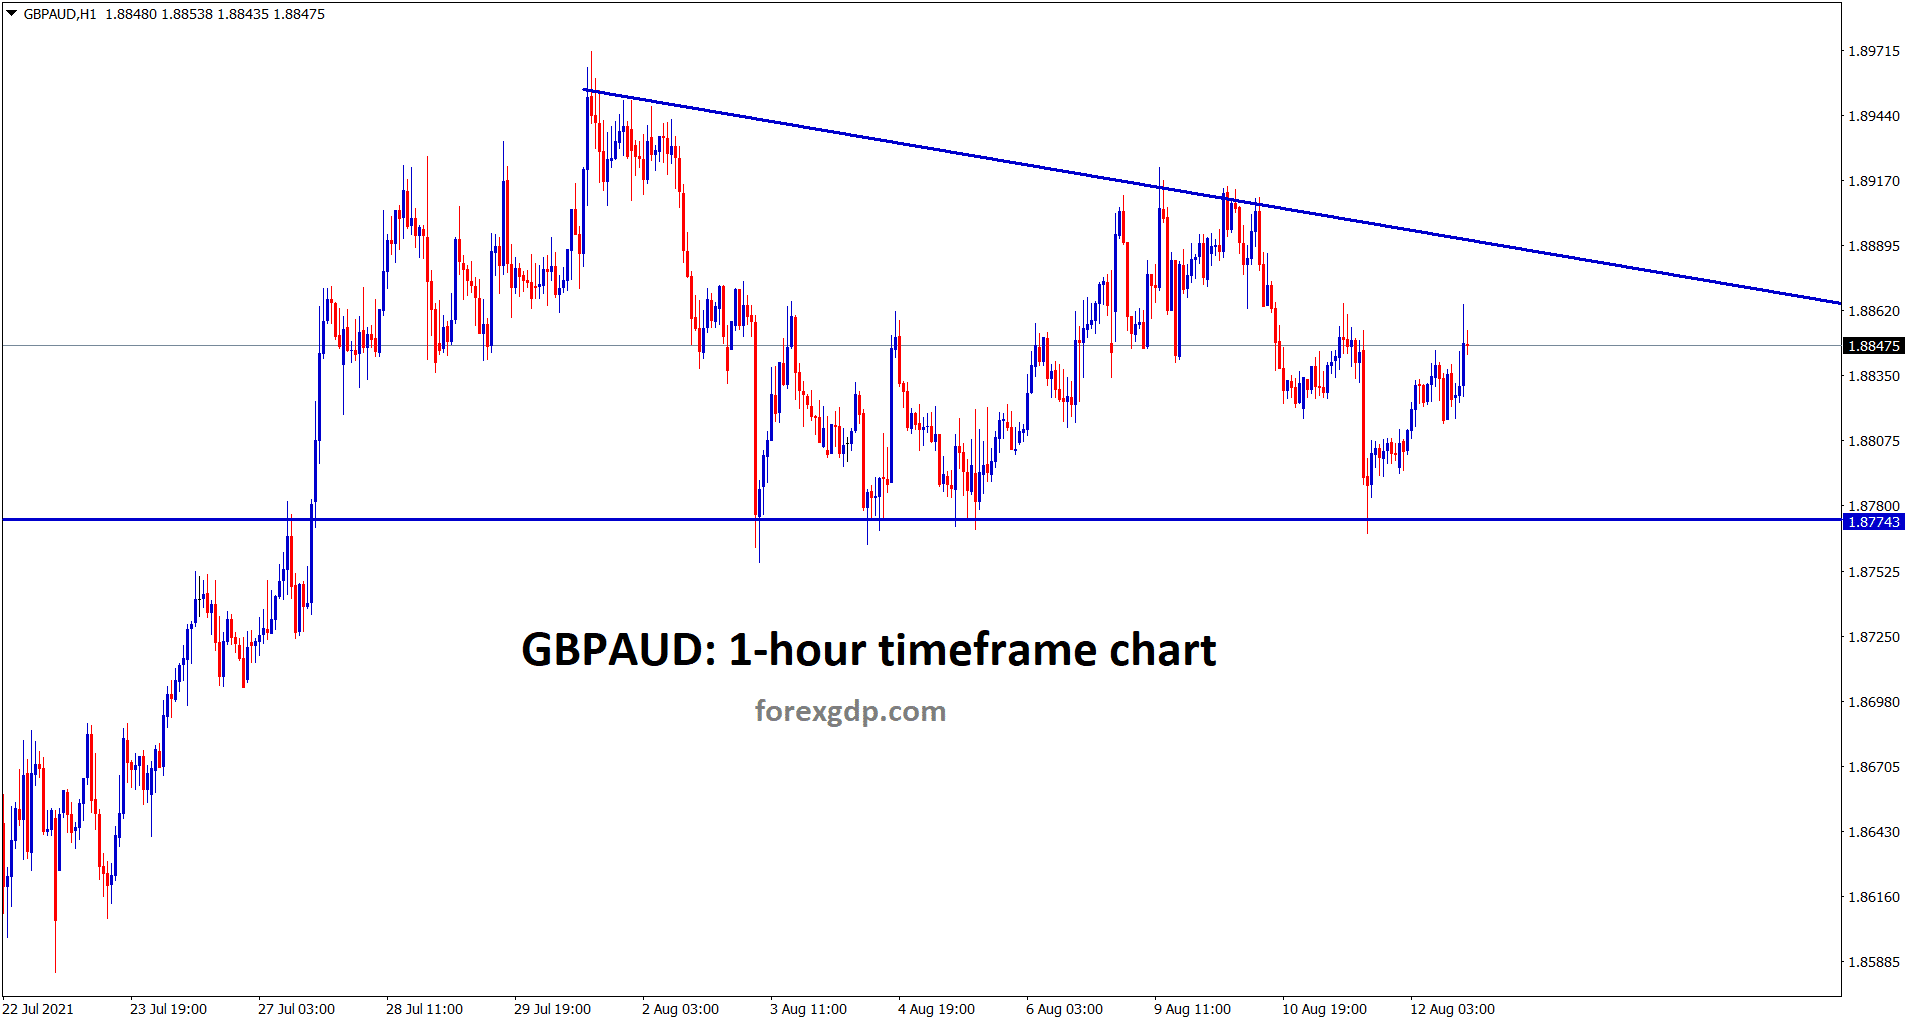 GBPAUD has formed a descending triangle pattern in the hourly chart